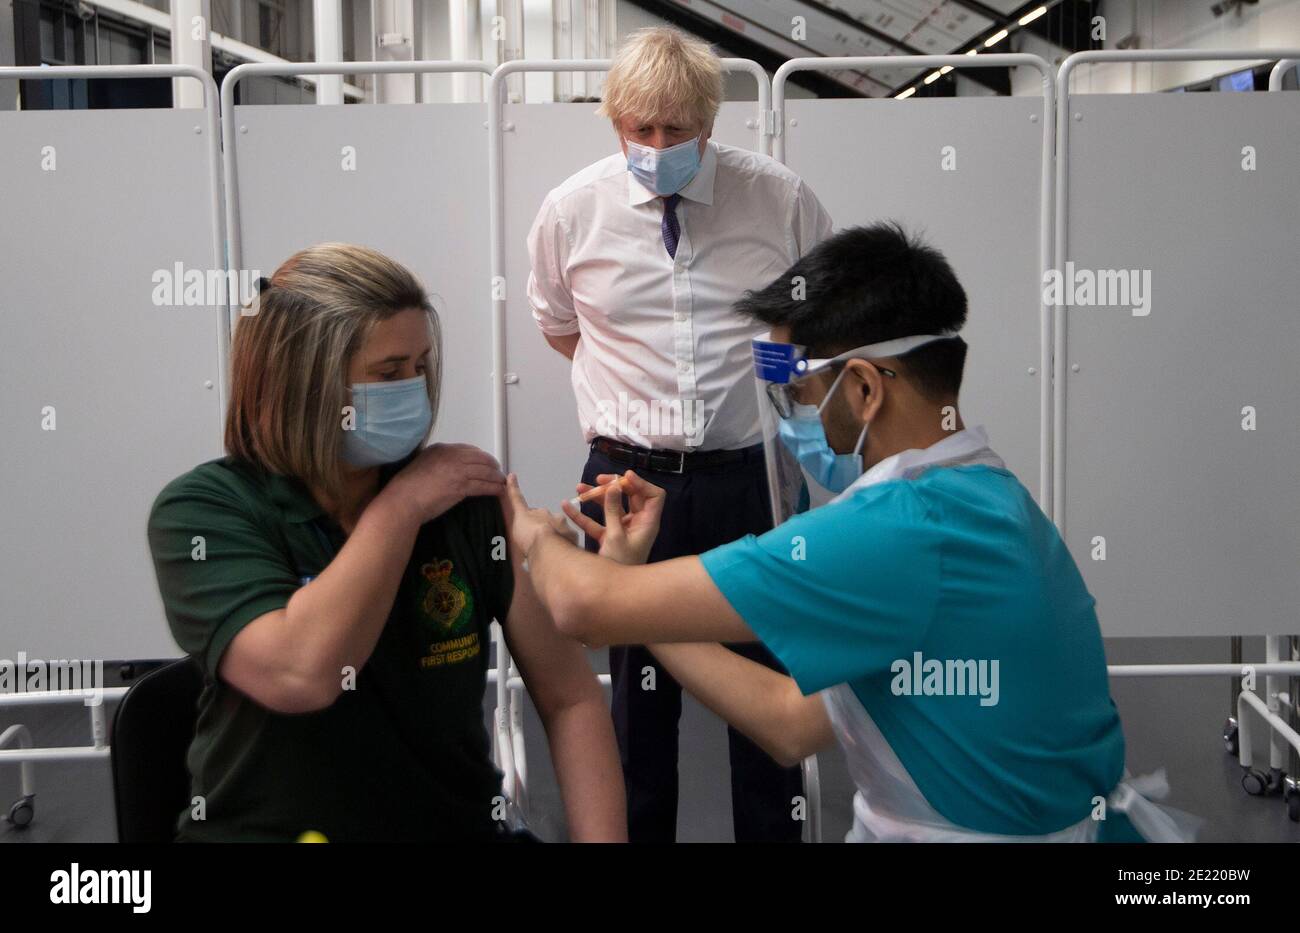 Prime Minister Boris Johnson at Ashton Gate Stadium in Bristol watches first responder Caroline Cook receiving an injection of a Covid-19 vaccine during a visit to one of the seven mass vaccination centres now opened to the general public as the government continues to ramp up the vaccination programme against Covid-19. Stock Photo